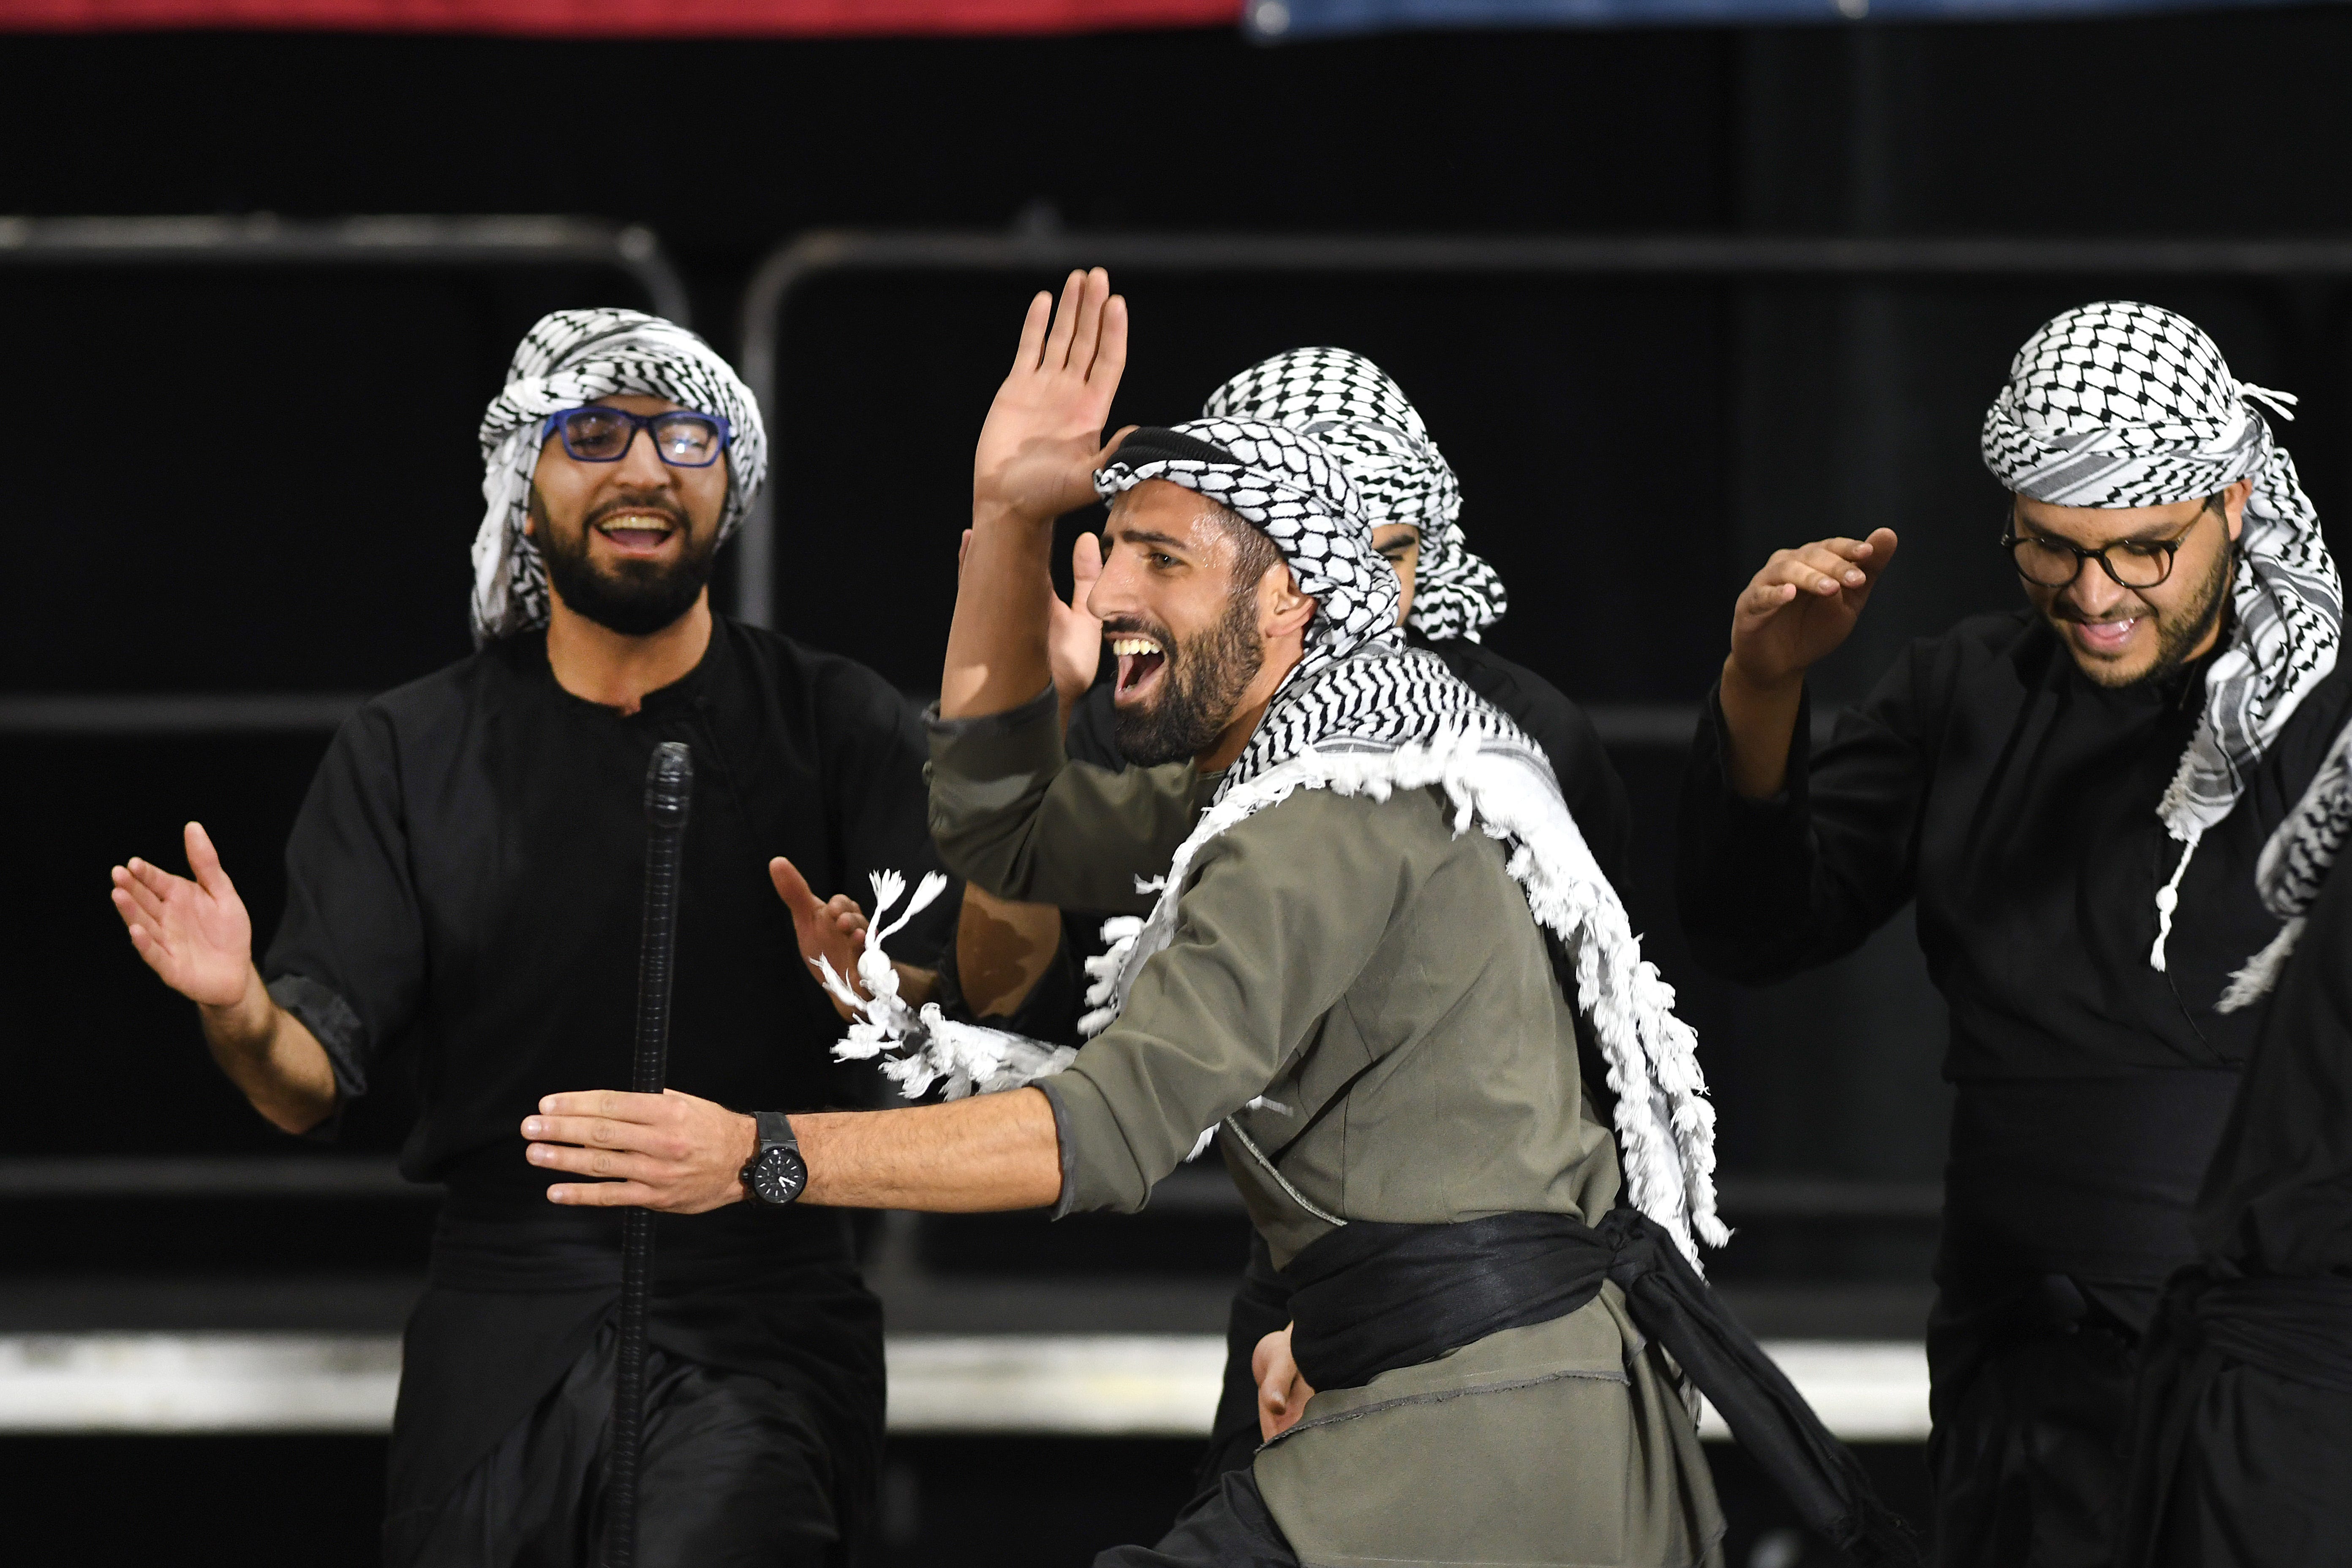 Members of the Mawtini Dabkeh Troupe of Dearborn perform before presidential candidate Bernie Sanders spoke on stage during a campaign rally at Salina Intermediate School in Dearborn.